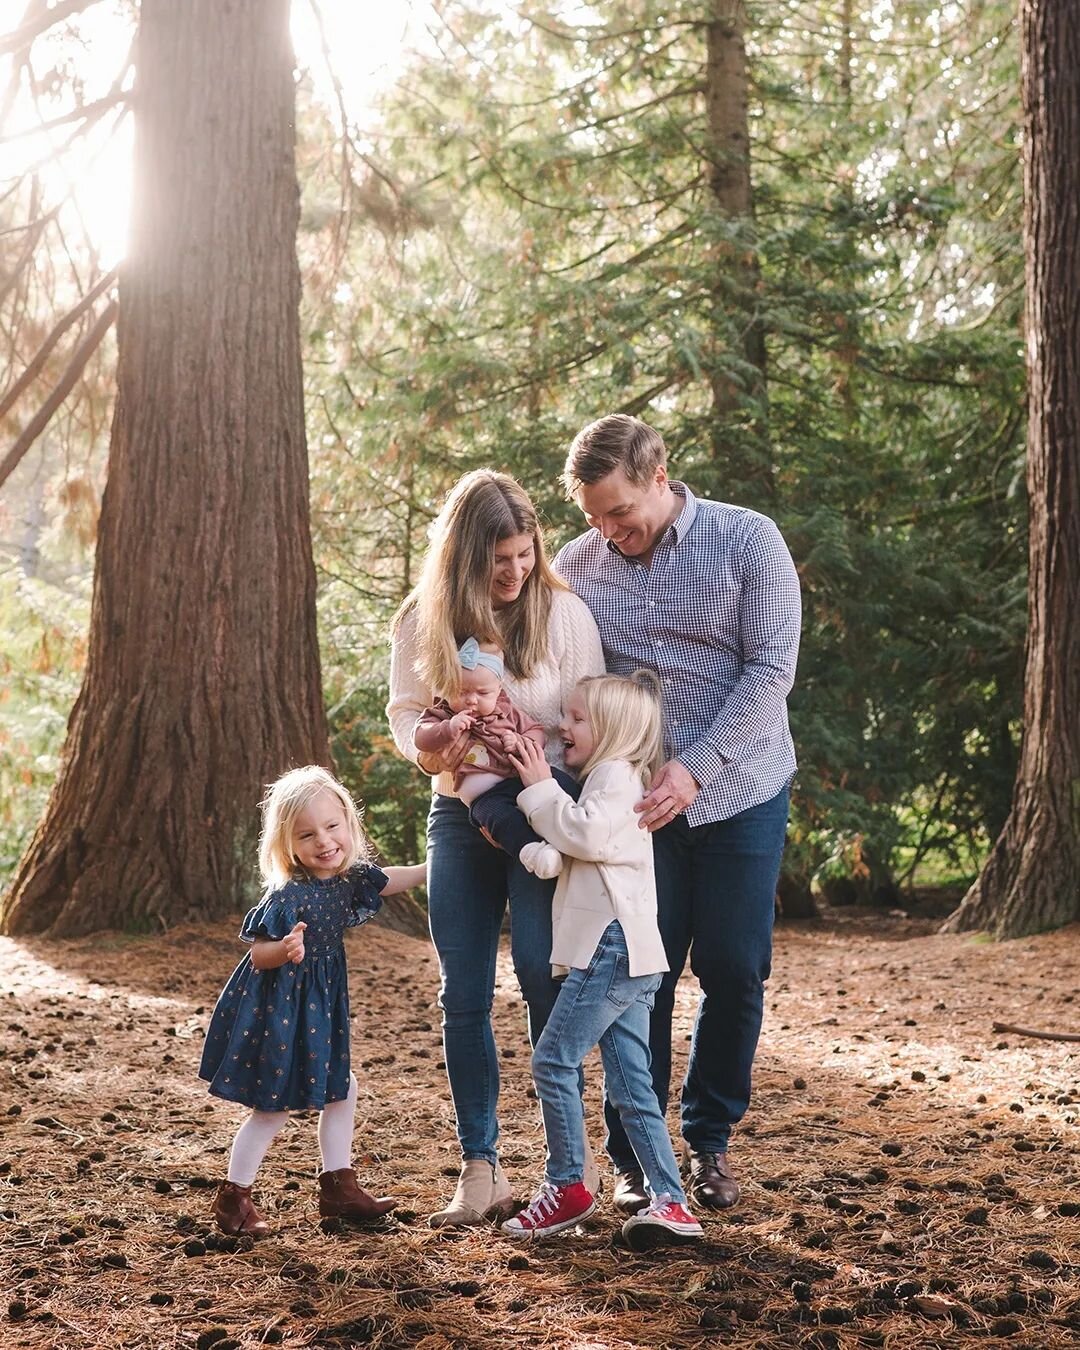 Get your annual family photos at the Arboretum with me! 🌲 
-
#MiniPortraitSession #FallFamilyPhotos&nbsp; #FamilyFirst #FamilyPhotos #SeattleFamilyPhotographer #SeattlePortraitSession #SeattleFall #HomePhotoSession #FamilyPortrait #SeattleFamilies #